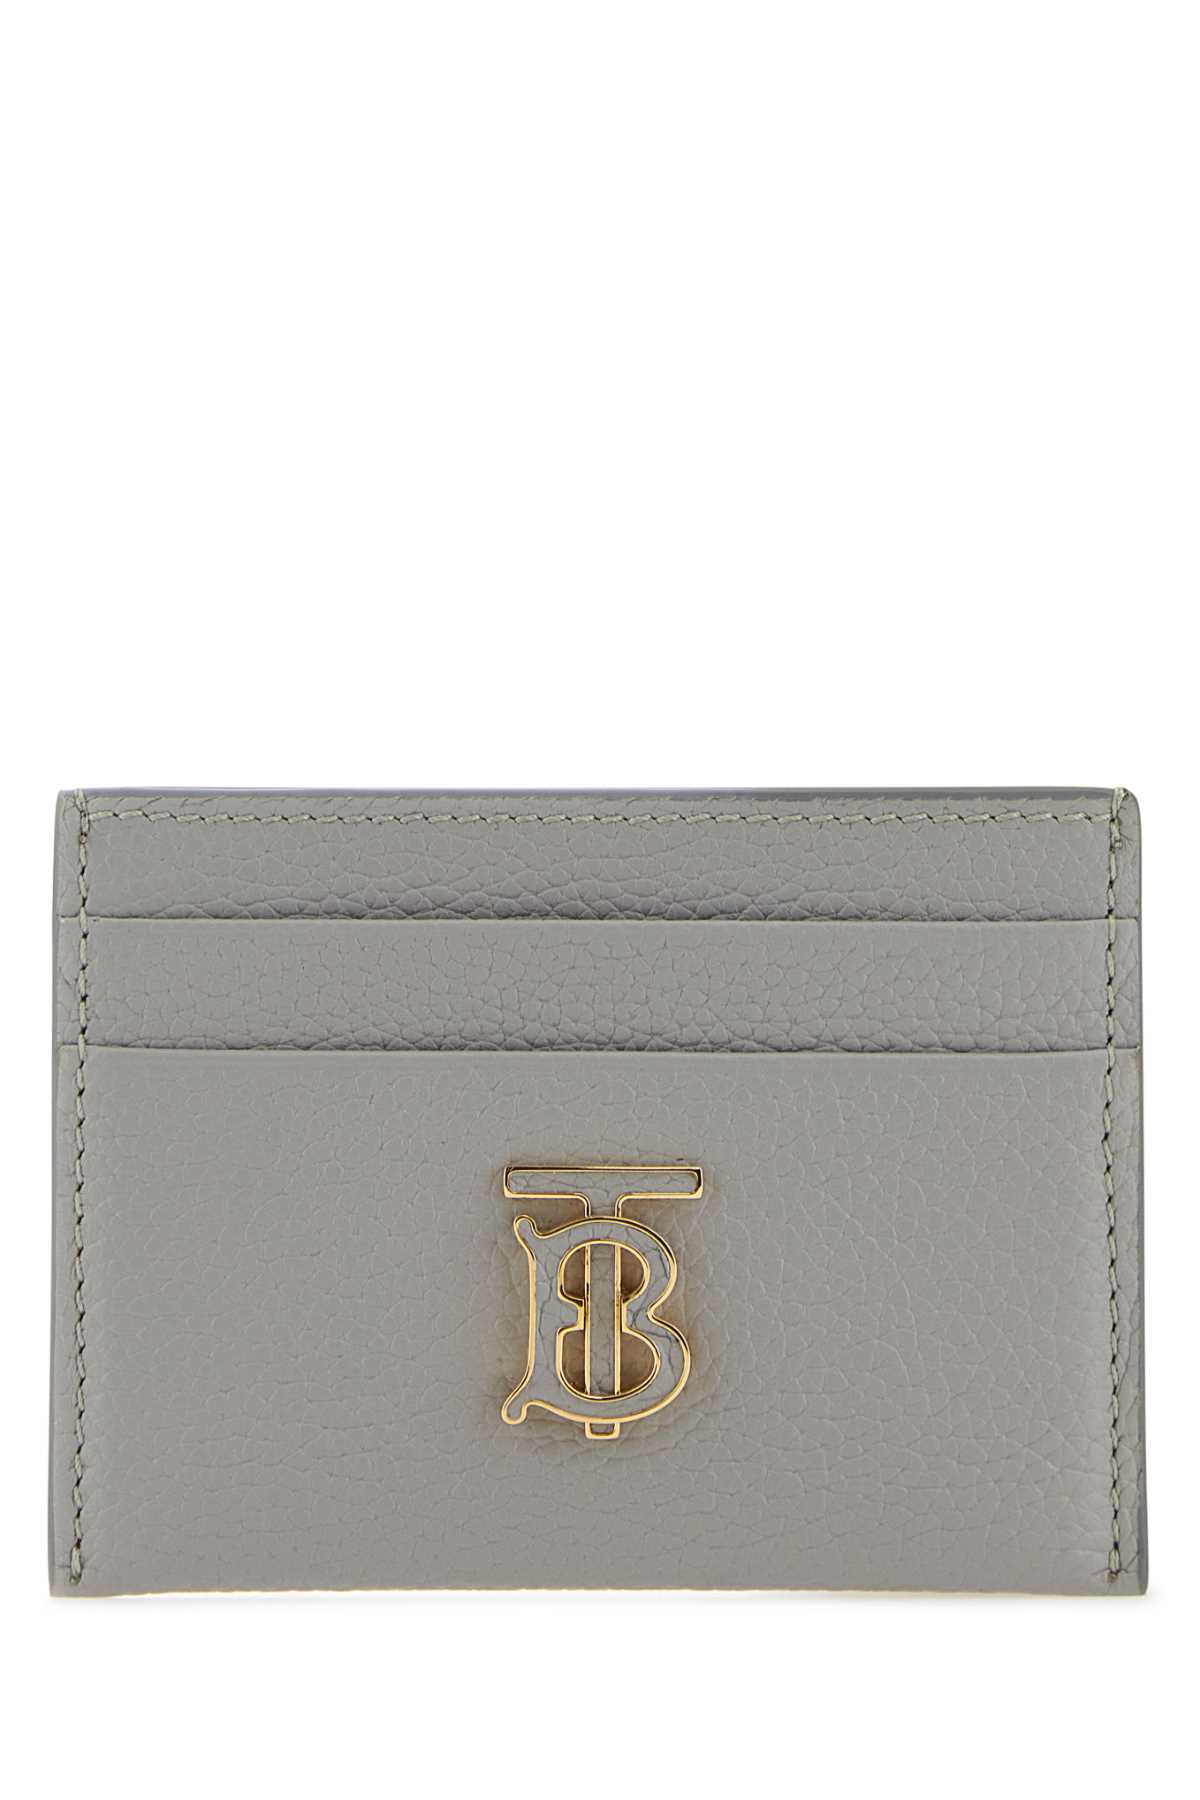 Burberry Grey Leather Tb Card Holder